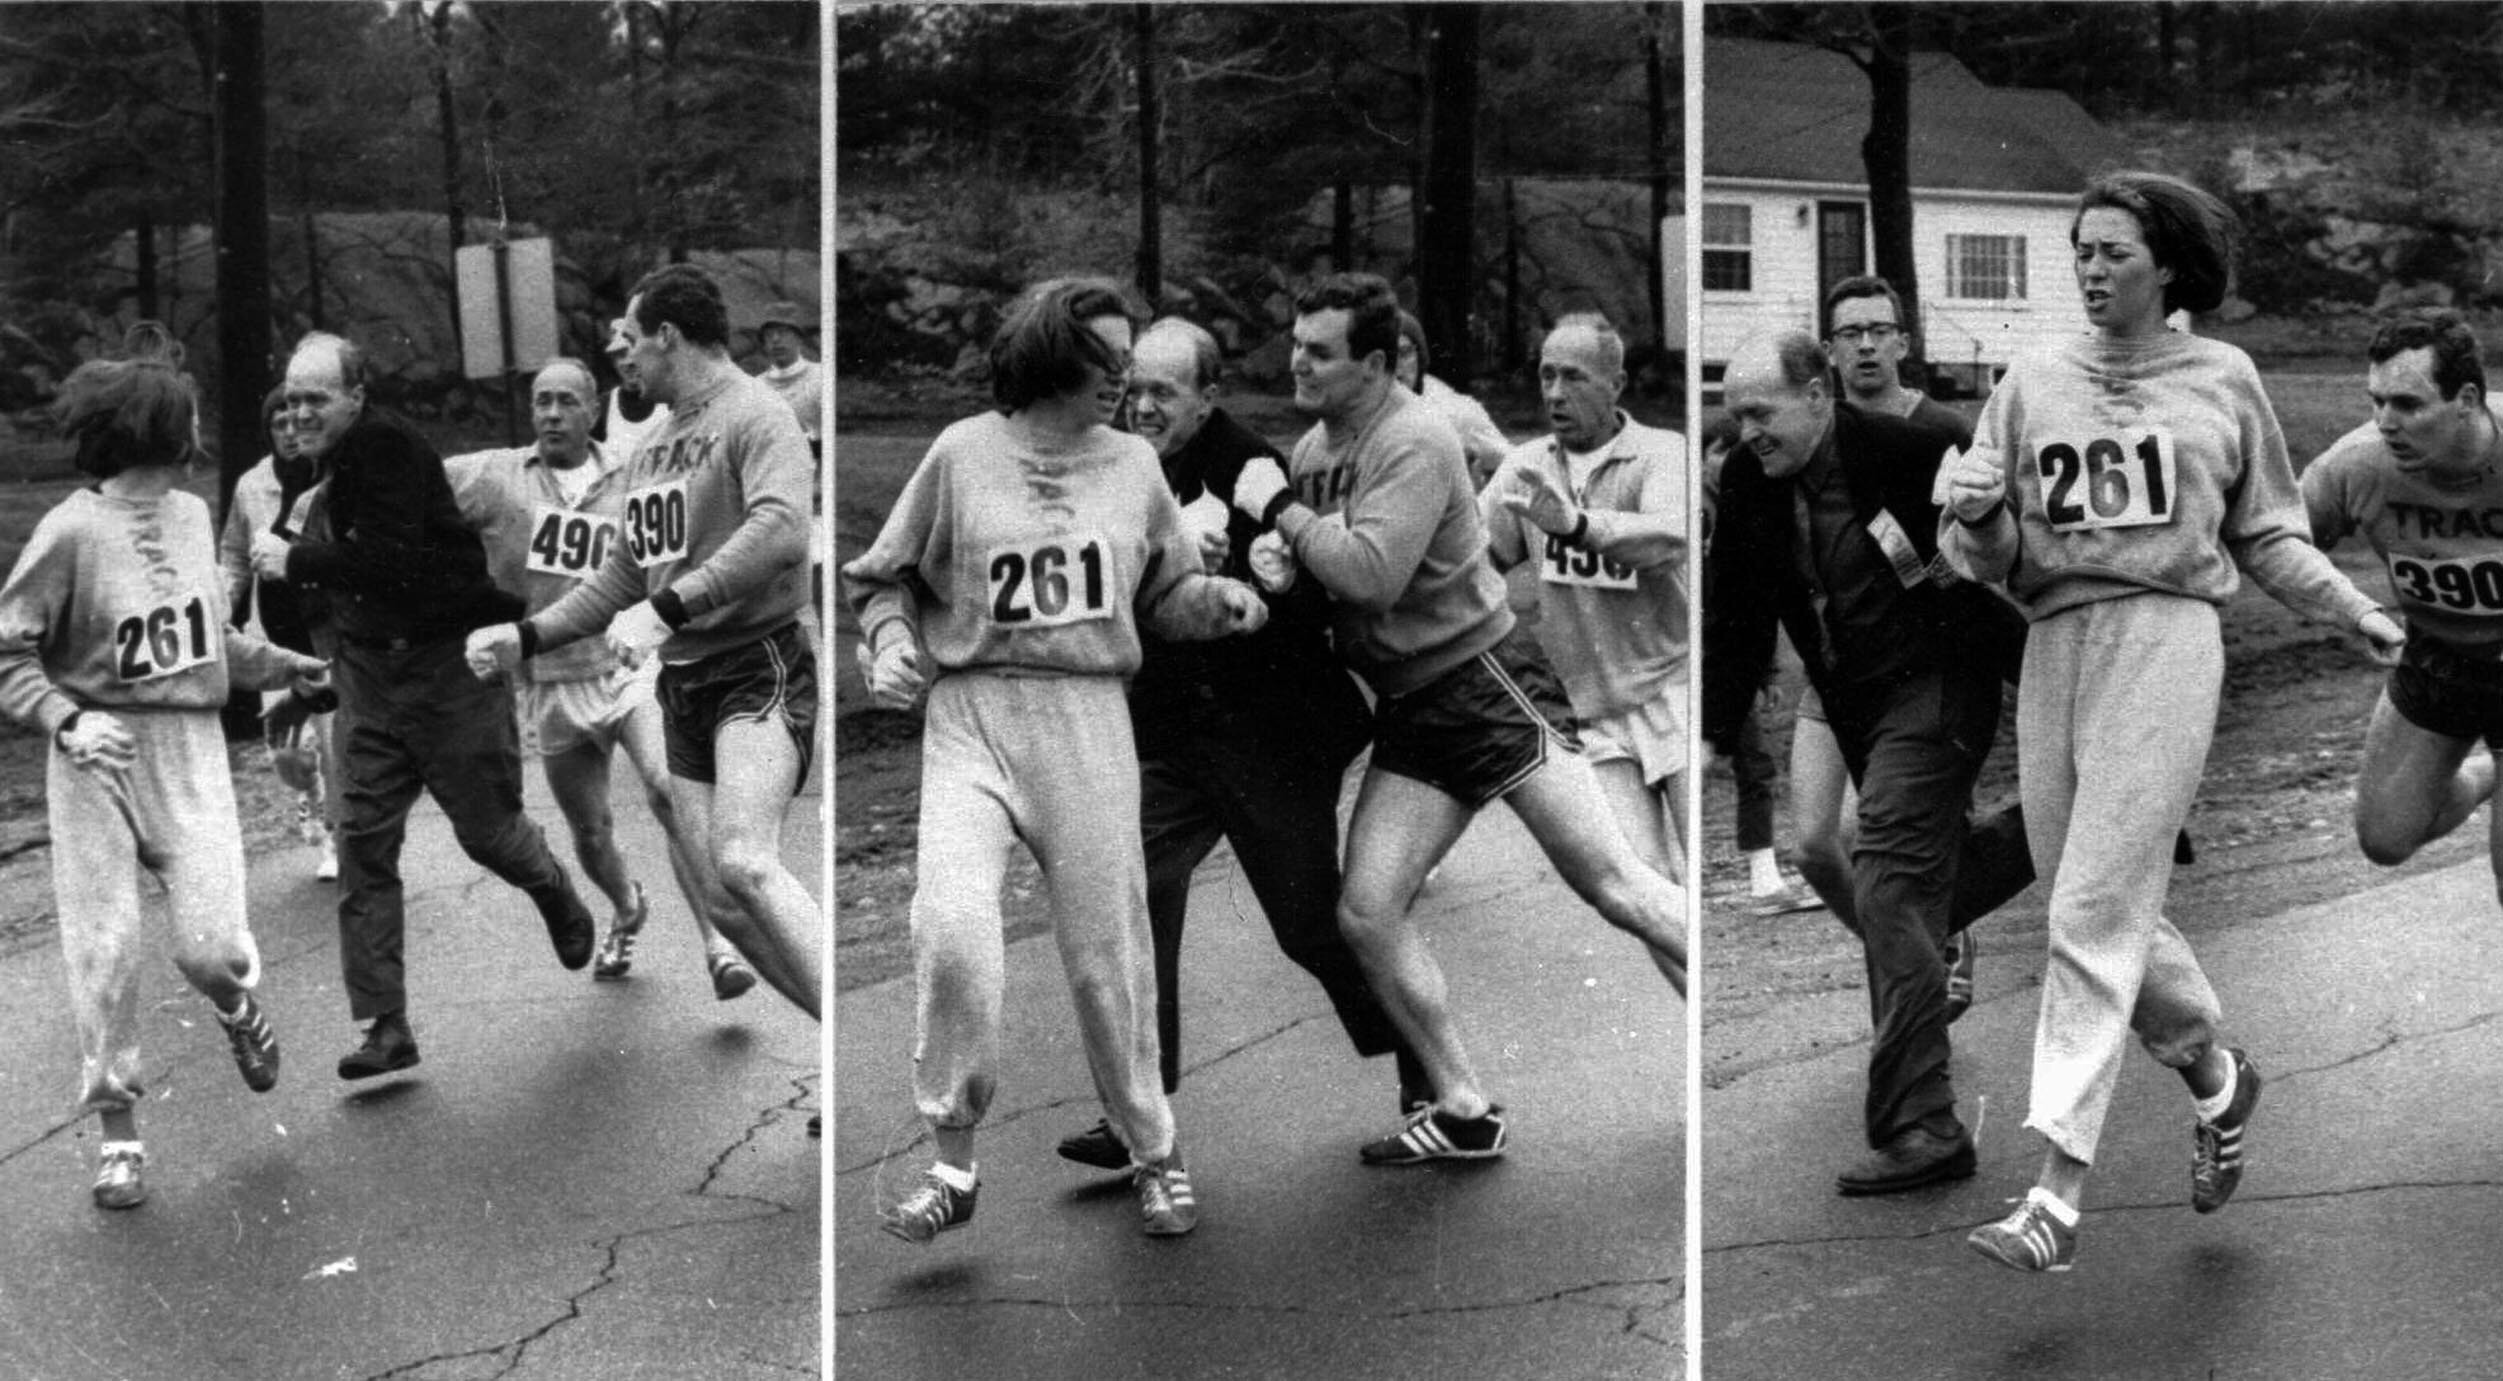 Photo credit: AP Images. Original caption: "Hopkinton, Mass, April 19, 1967: Who says chivalry is dead? When a girl listed as 'K. Switzer from Syracuse' found herself about to be thrown out of normally all-male Boston Marathon today, husky companion Thomas Miller of Syracuse threw block that tossed race official out of the running instead. Sequence show Jock Semple, official, moving in to intercept Miss Switzer, then being bounced himself by Miller. Photos by Harry Trask of Boston Traveler."